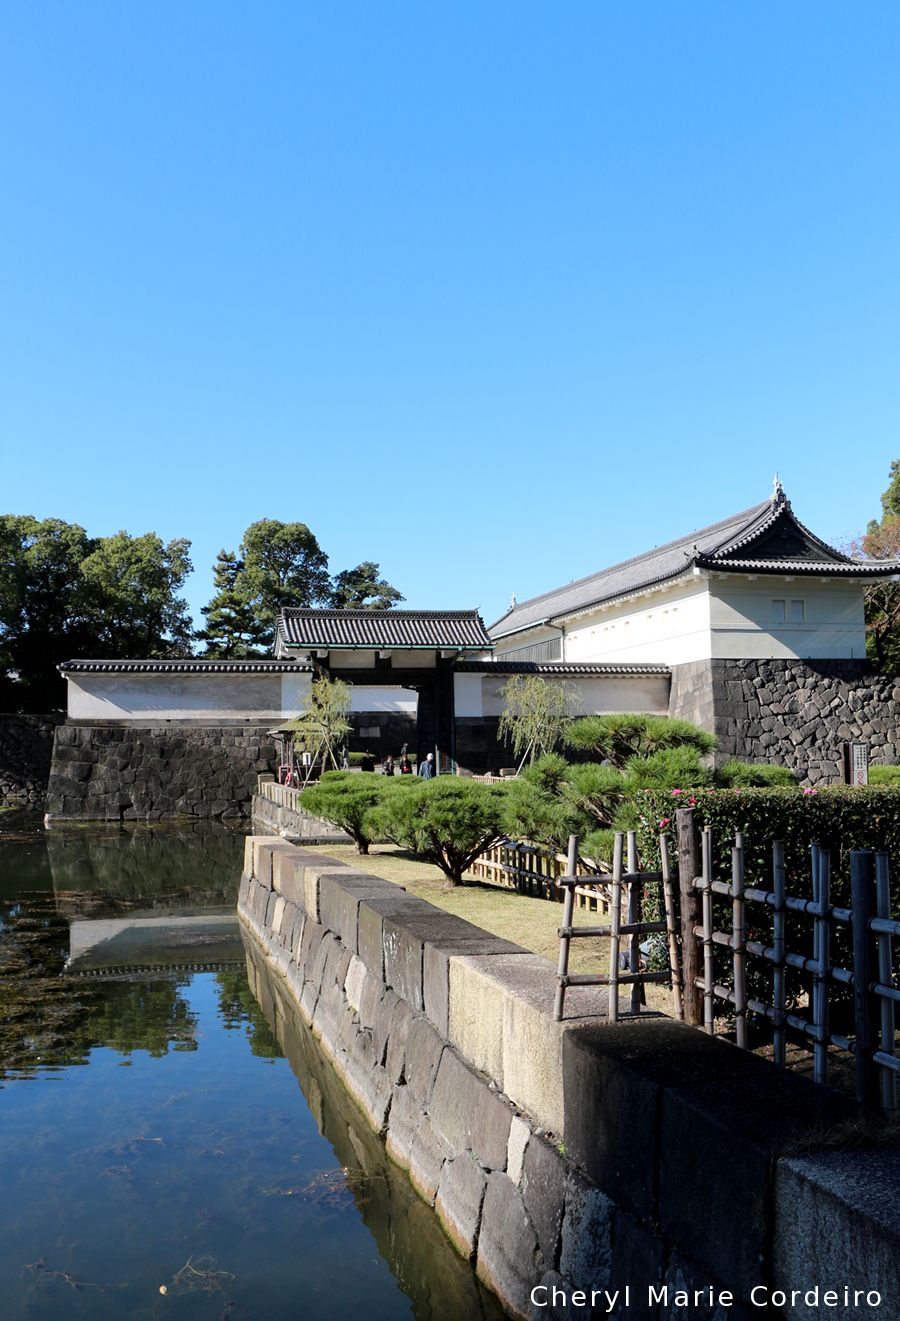 The East Gardens of the Imperial Palace